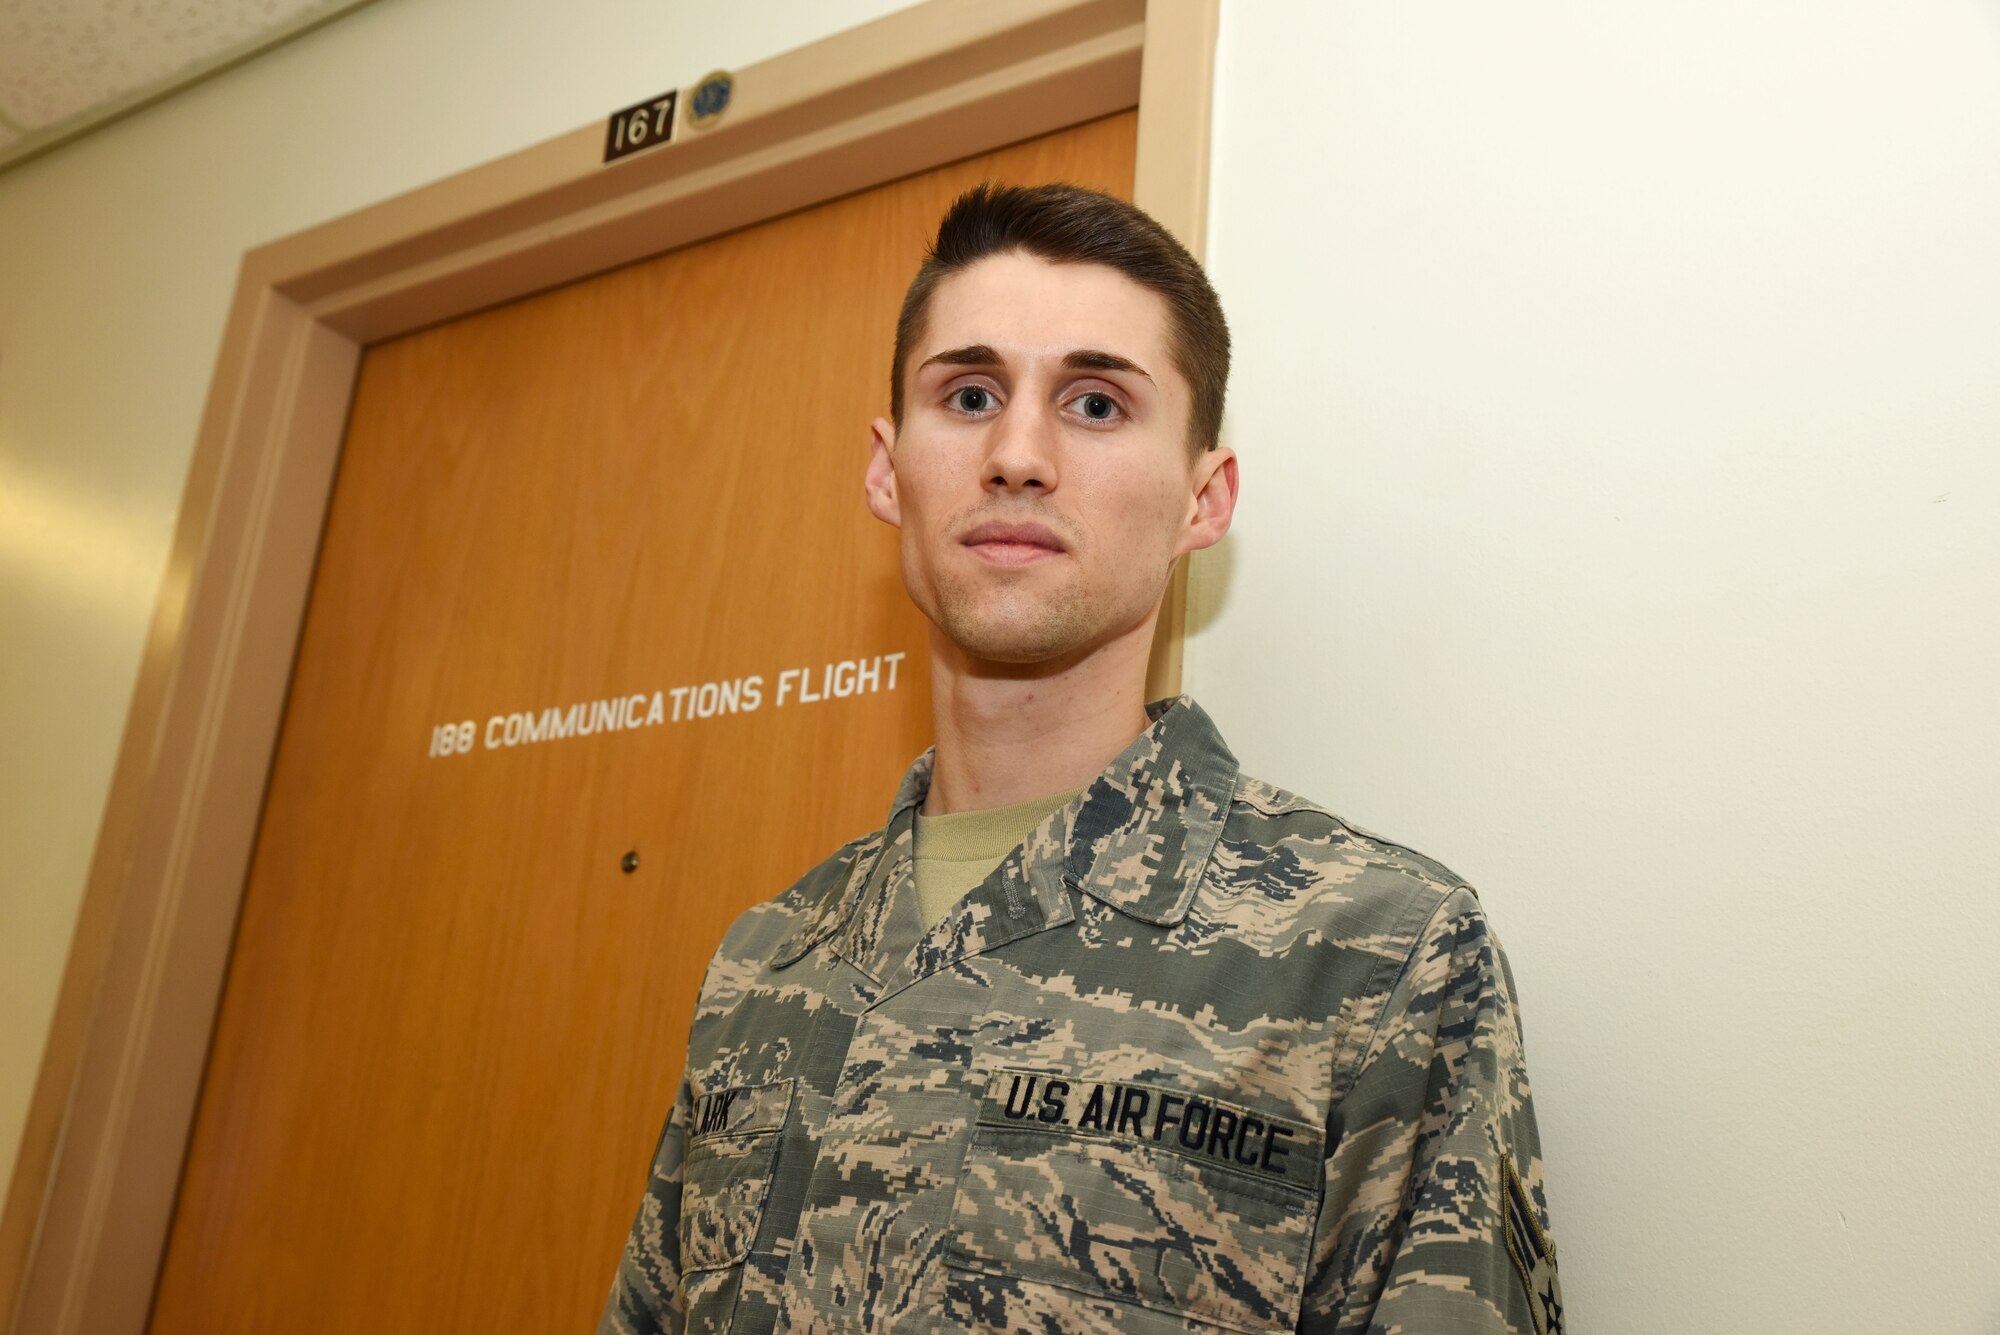 Senior Airman Travis Clark, 188th Communications Flight Focal Point, has been selected as the Flying Razorback Spotlight for February 2016. Clark has been in the 188th Wing for three years and his goal is to reenlist and eventually achieve the rank of technical sergeant. (U.S. Air National Guard photo by Senior Airman Cody Martin/Released)